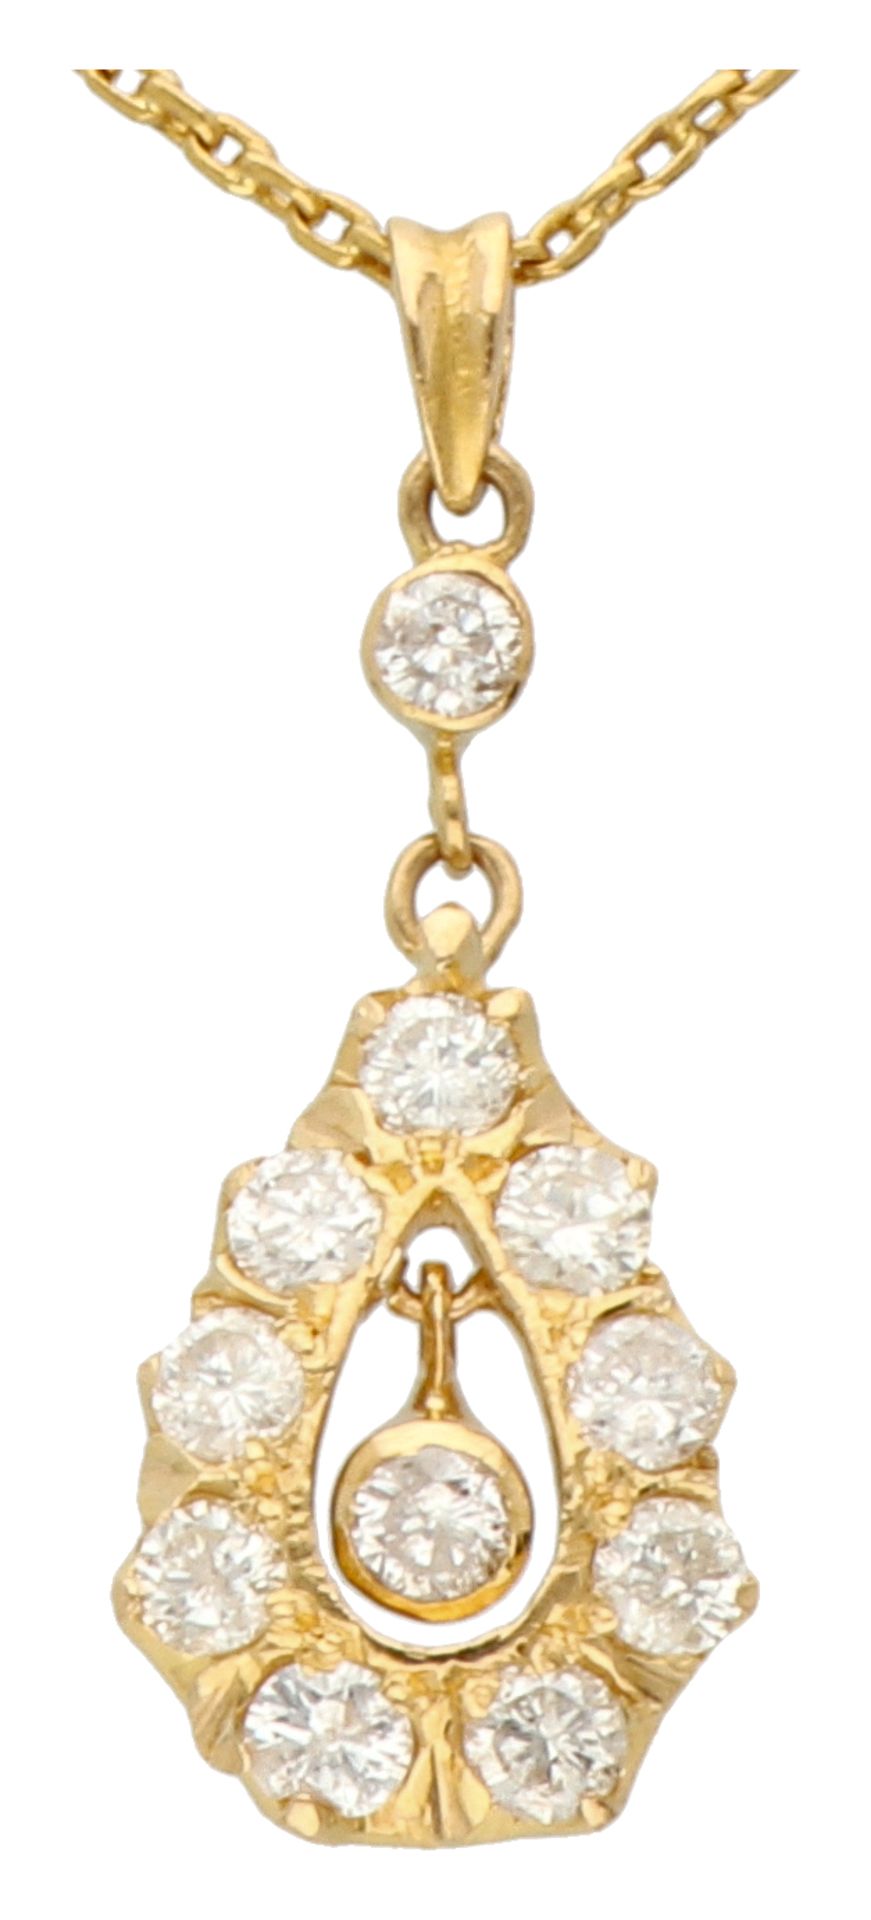 No reserve - 18K Yellow gold necklace with pendant set with approx. 0.55 ct. diamond. - Image 2 of 3